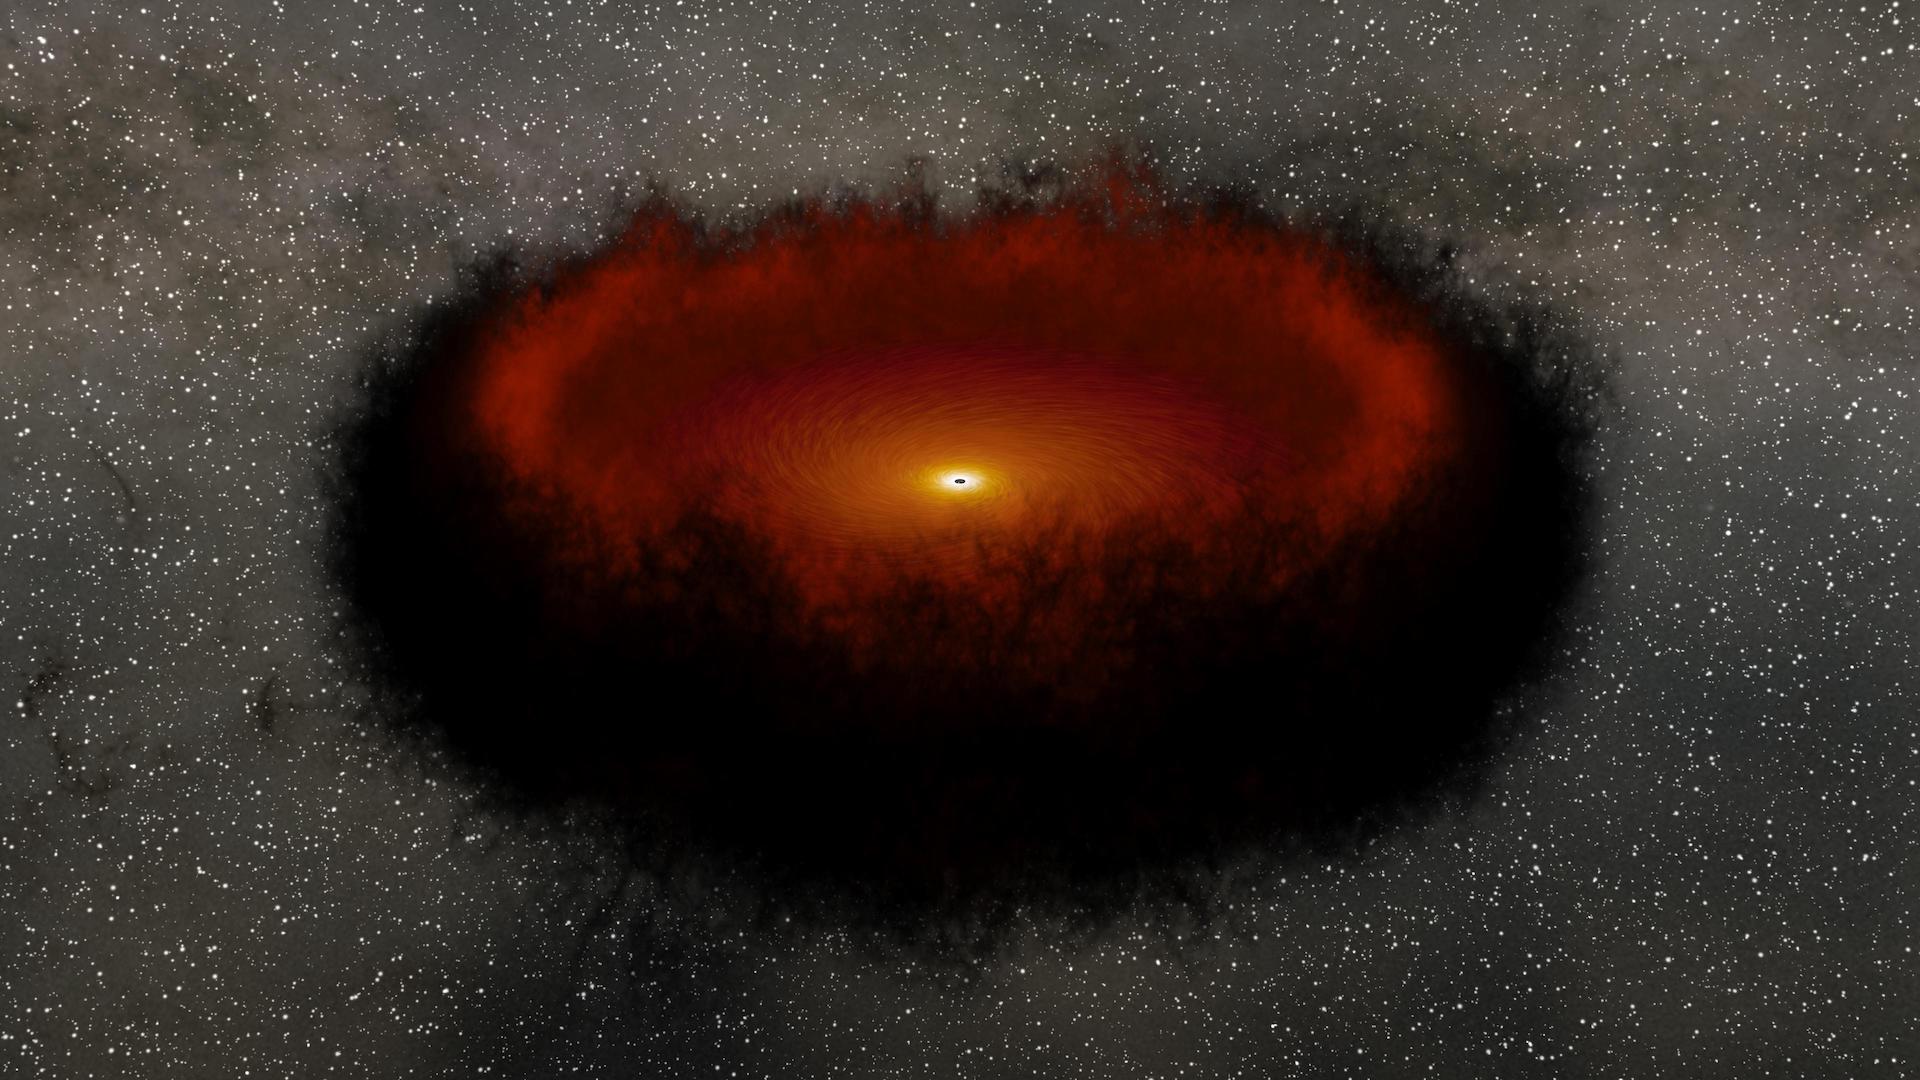 Black hole singularities defy physics. New research could finally do away with them.